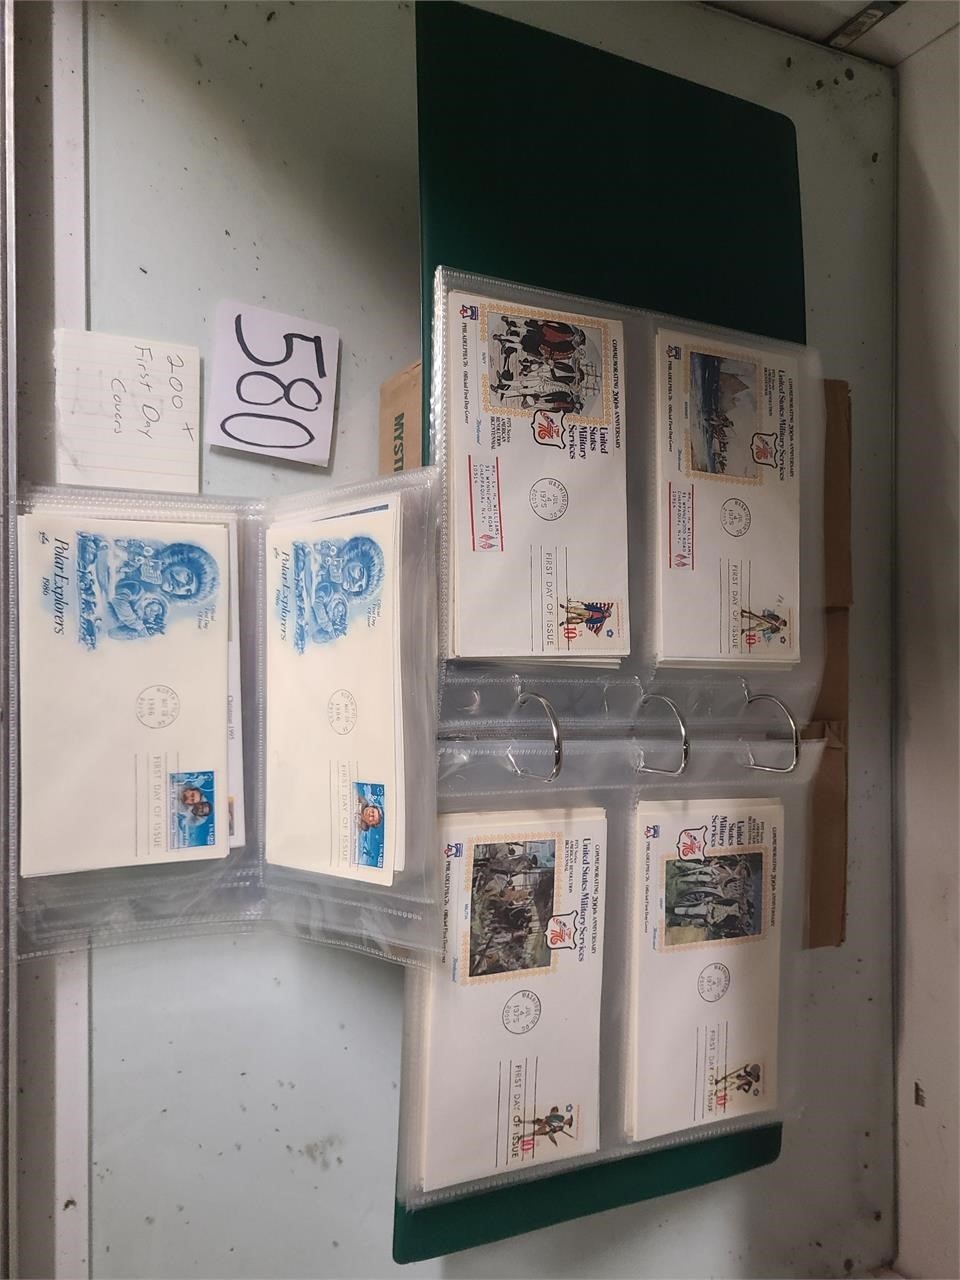 200 First day covers.